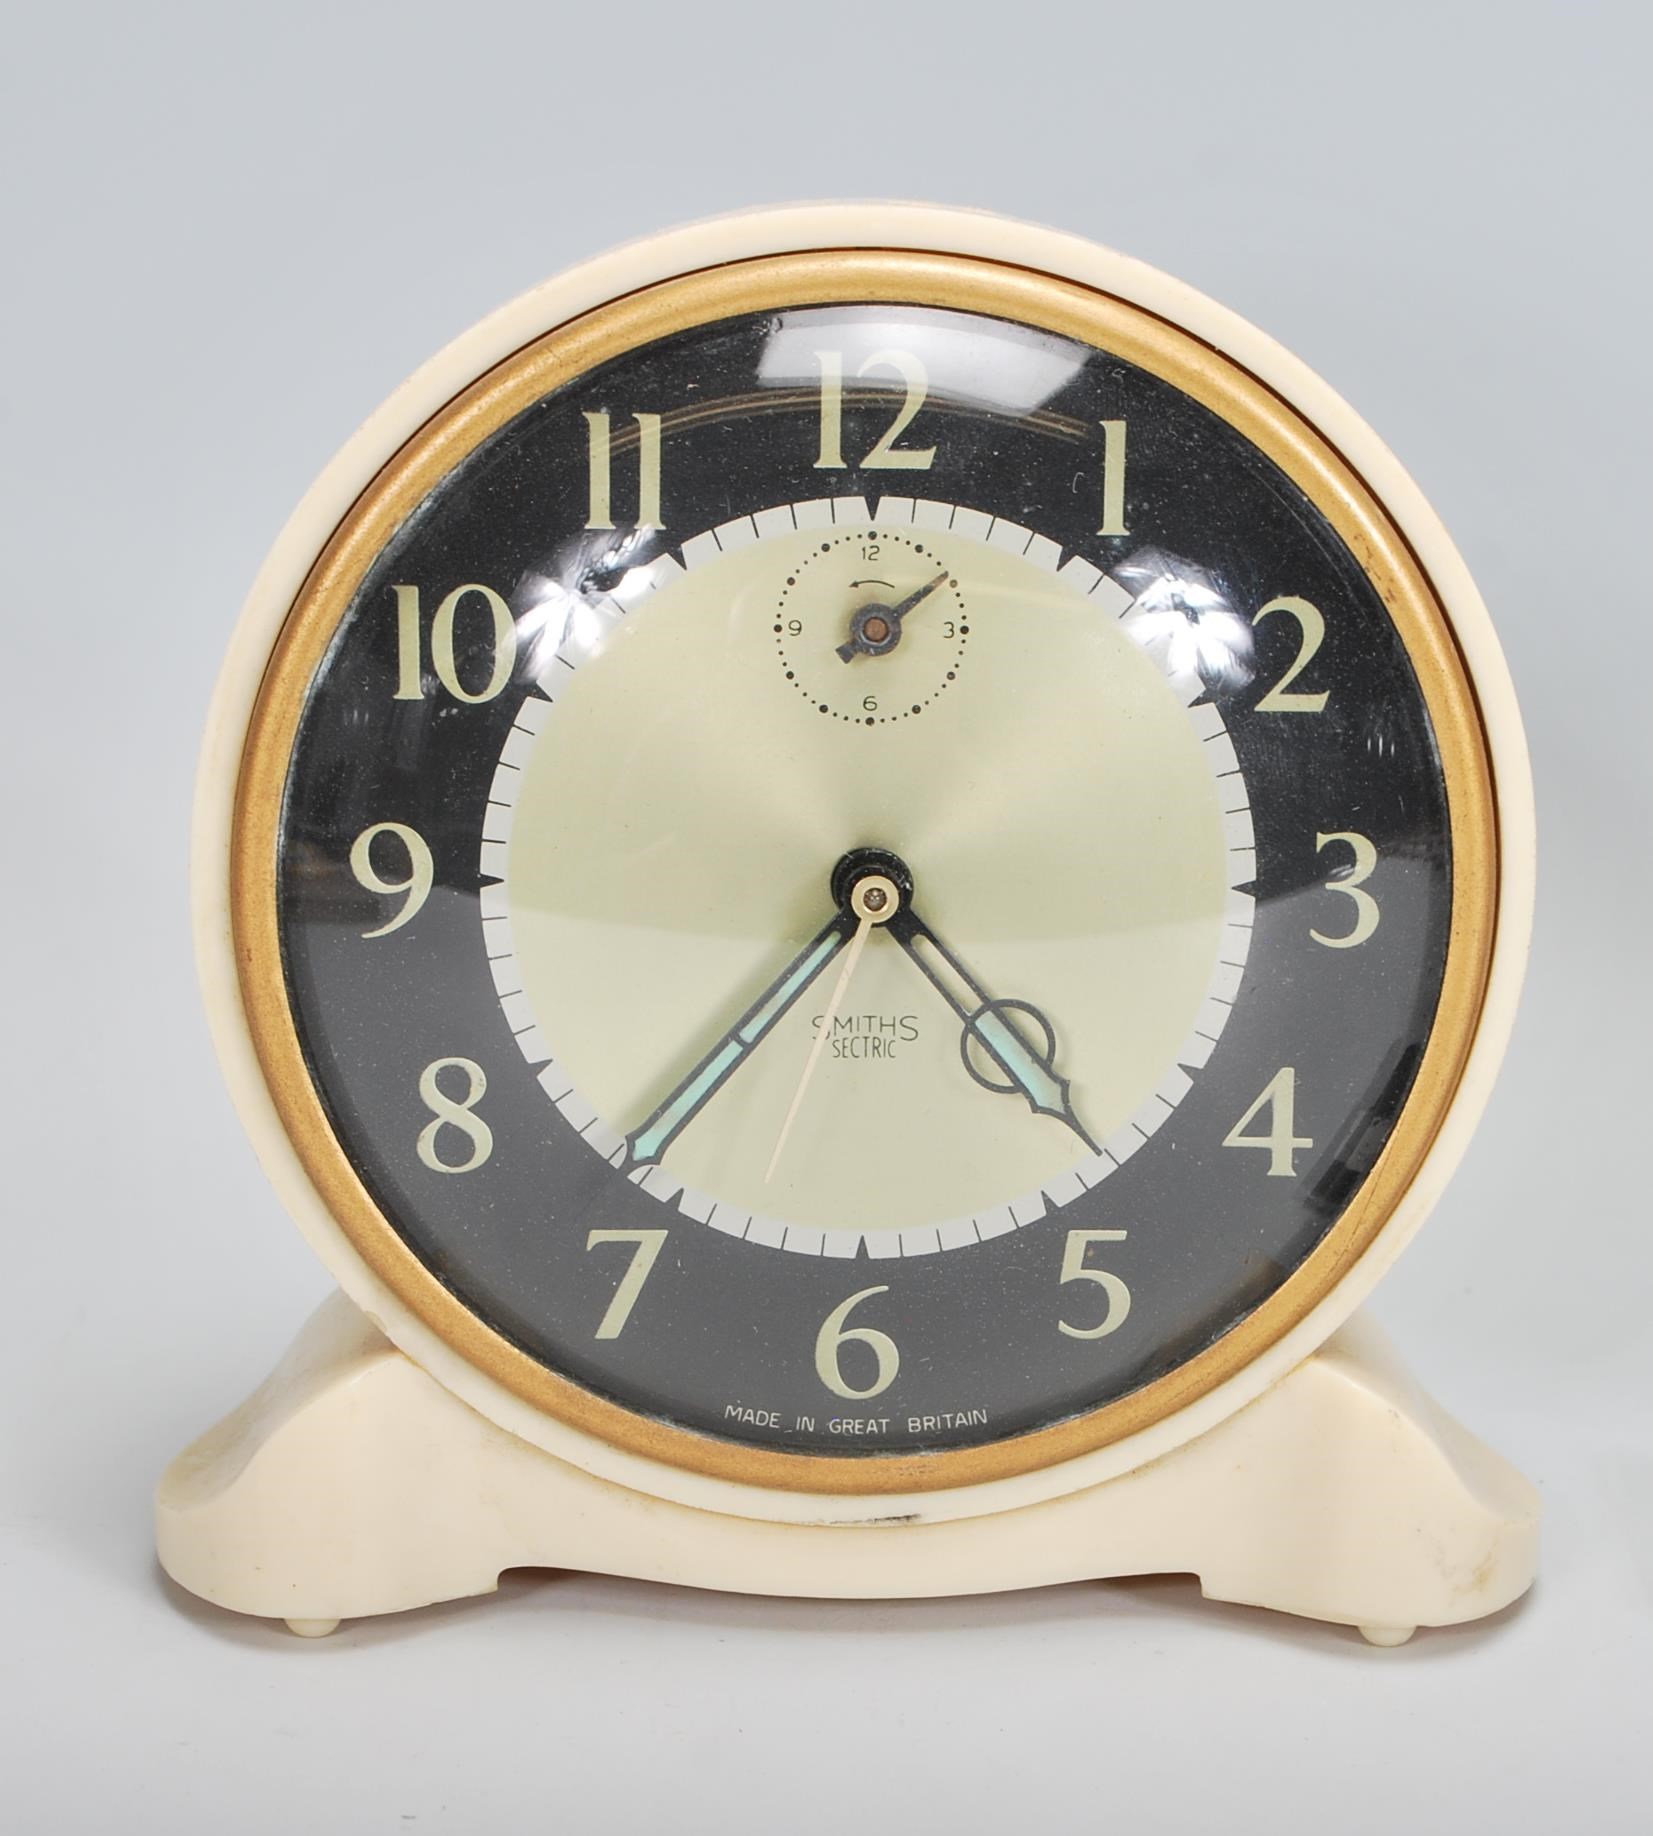 A group of three 20th Century Art deco mantel clocks by Smith Sectric and one Smith Electric. One of - Image 2 of 6